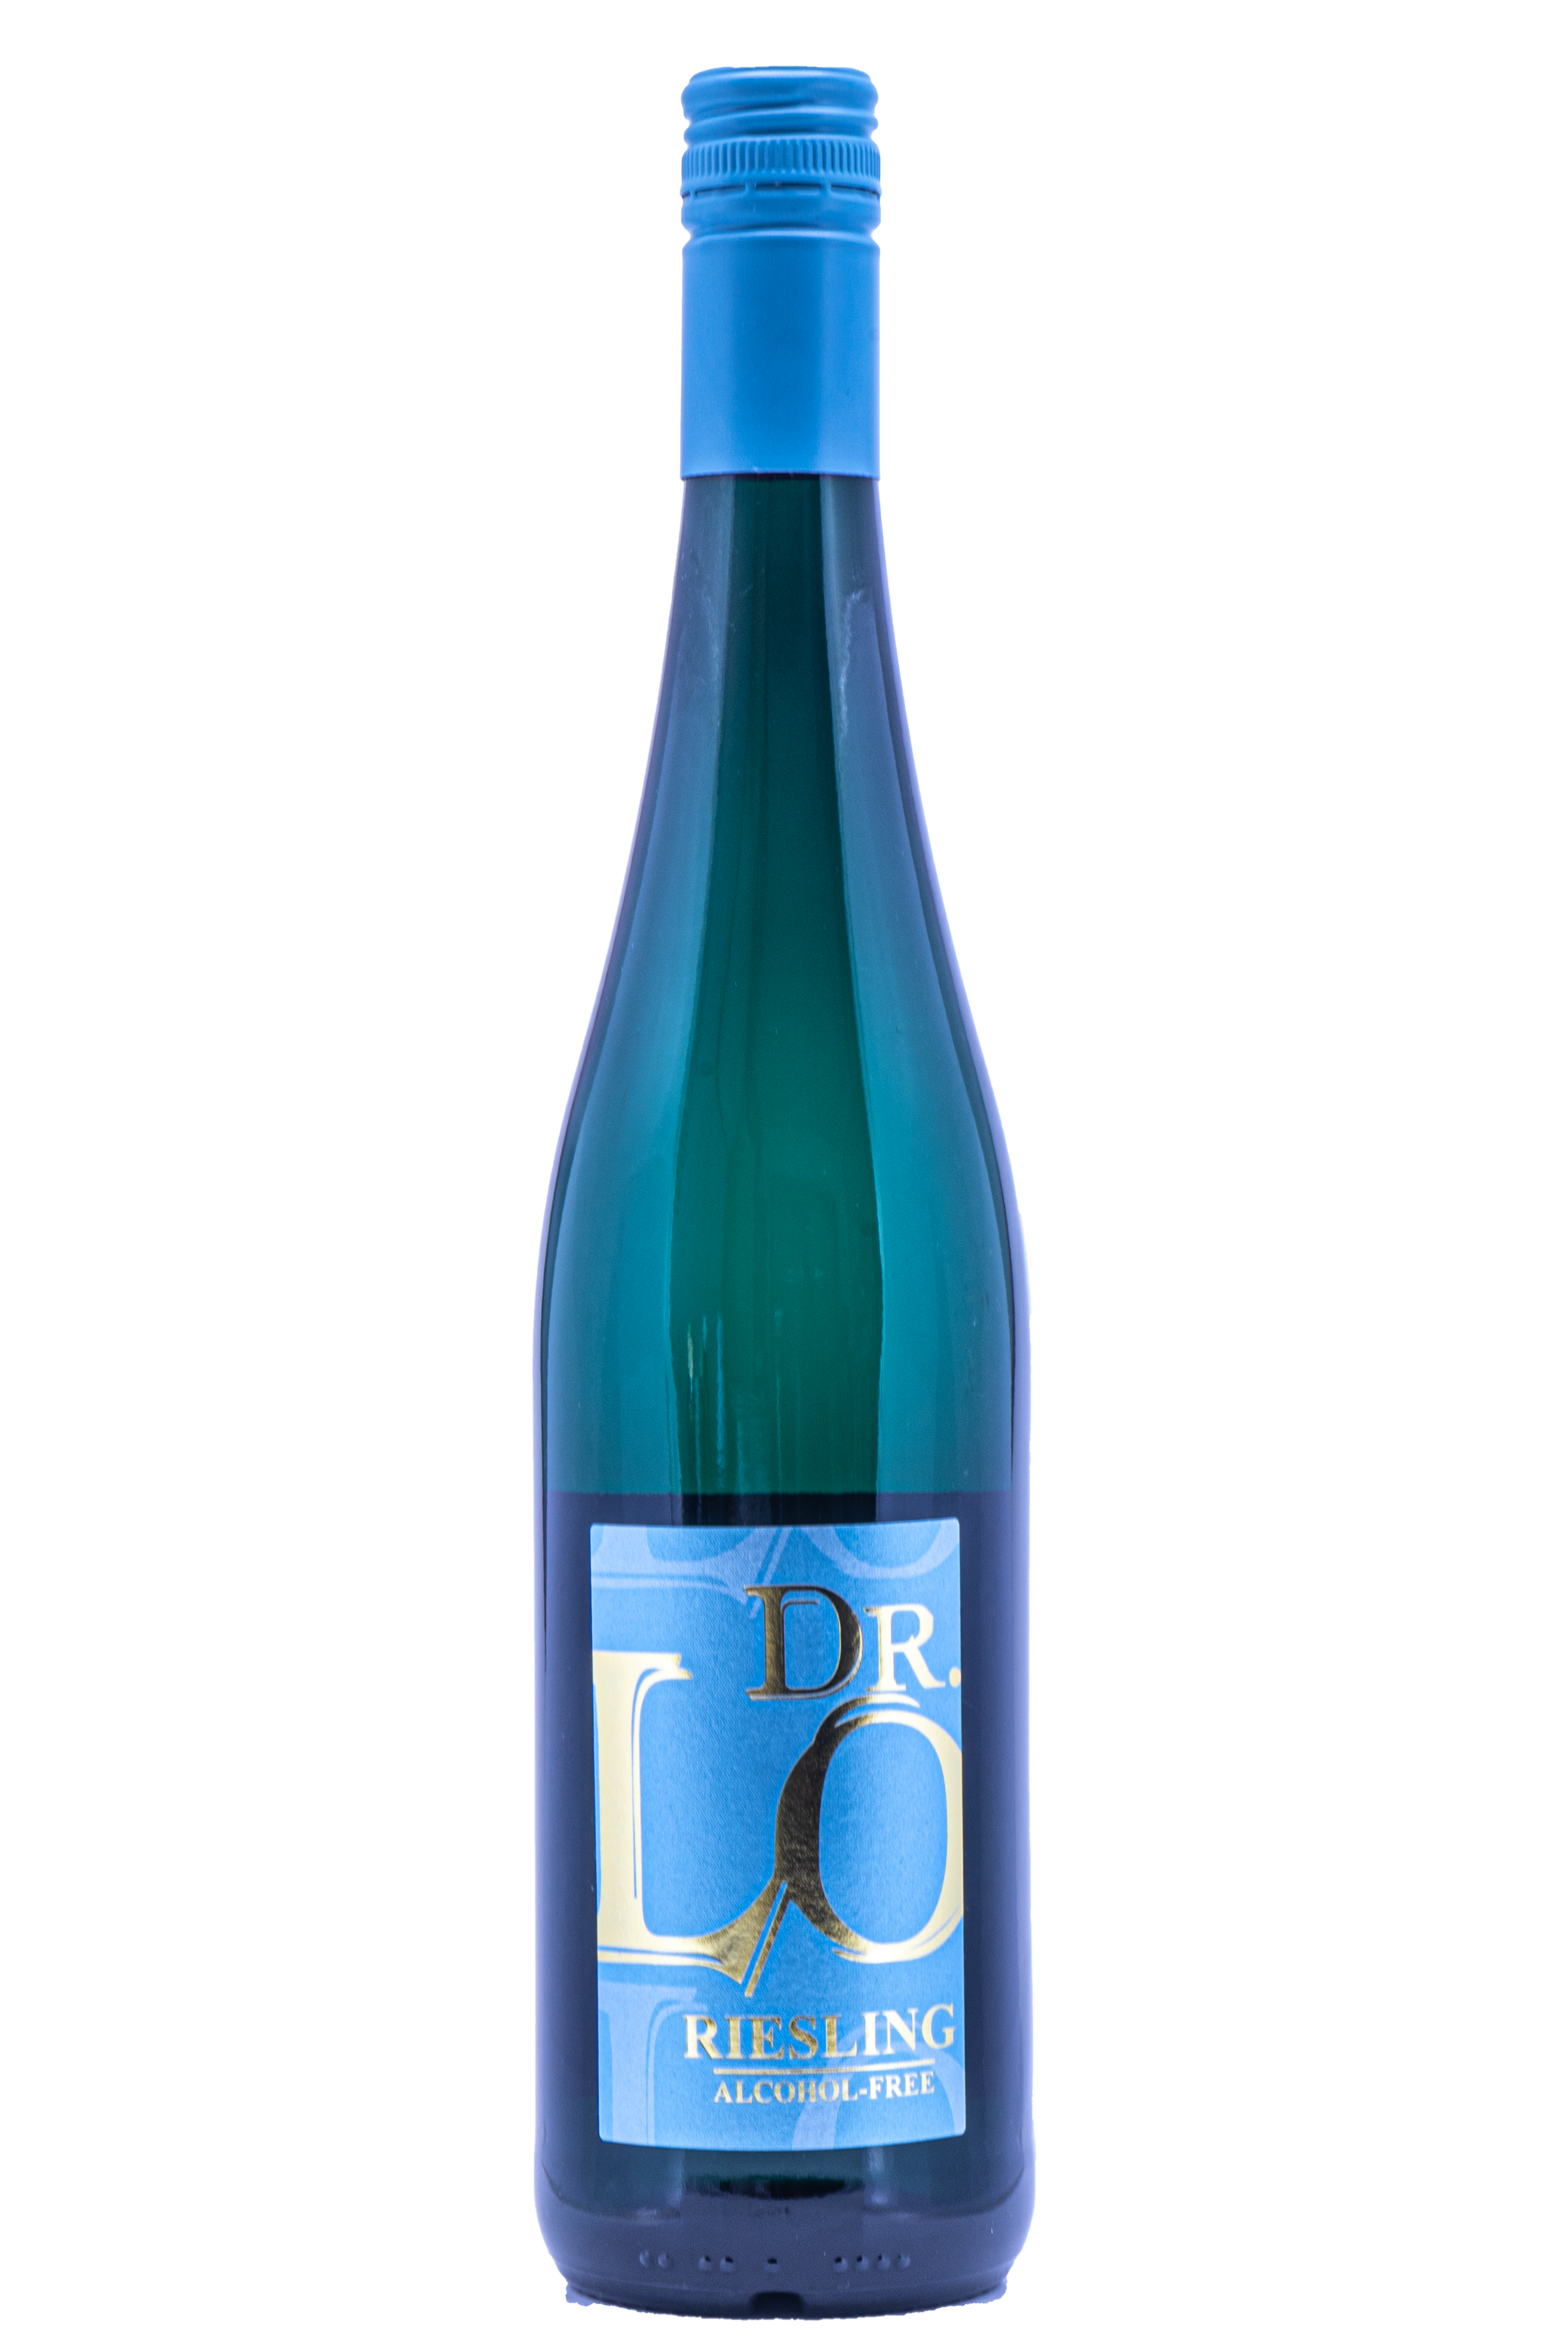 DR. LO Riesling Alkoholfrei 